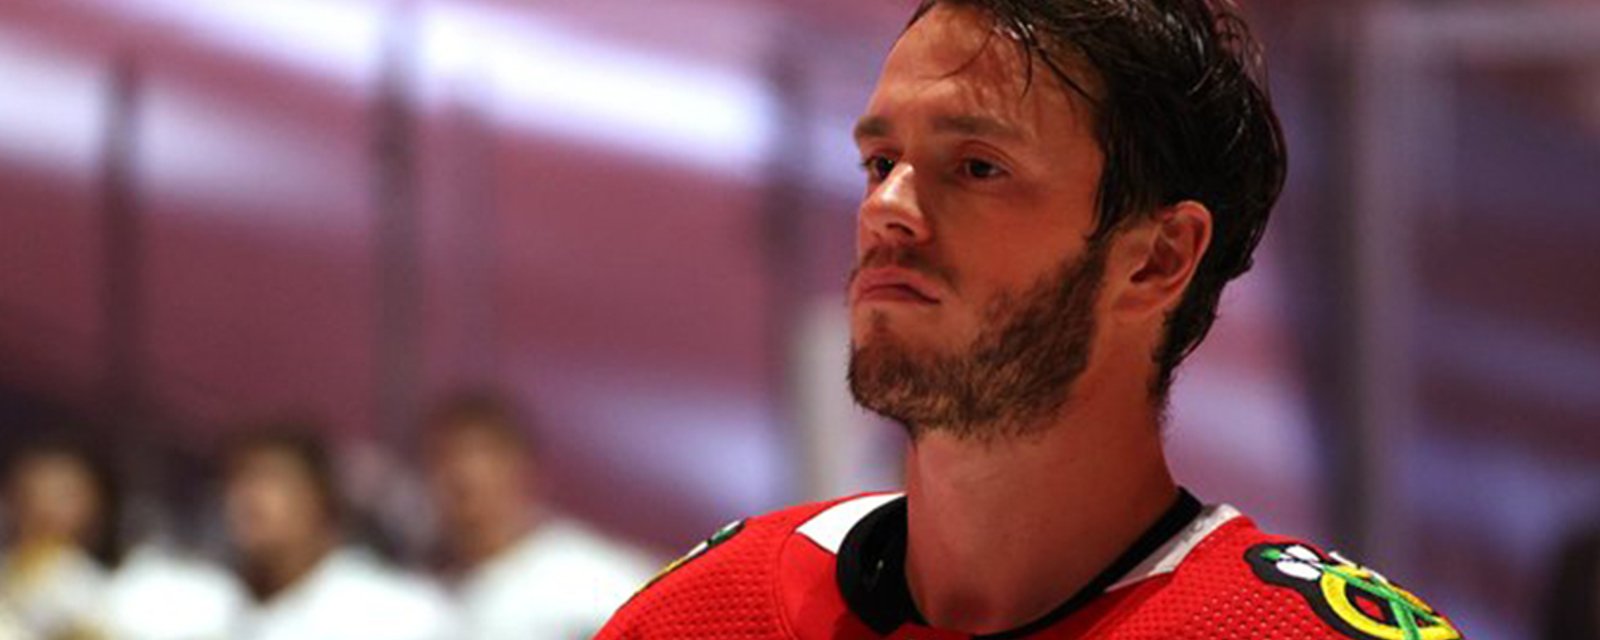 Jonathan Toews comments on allegations levied against the Blackhawks